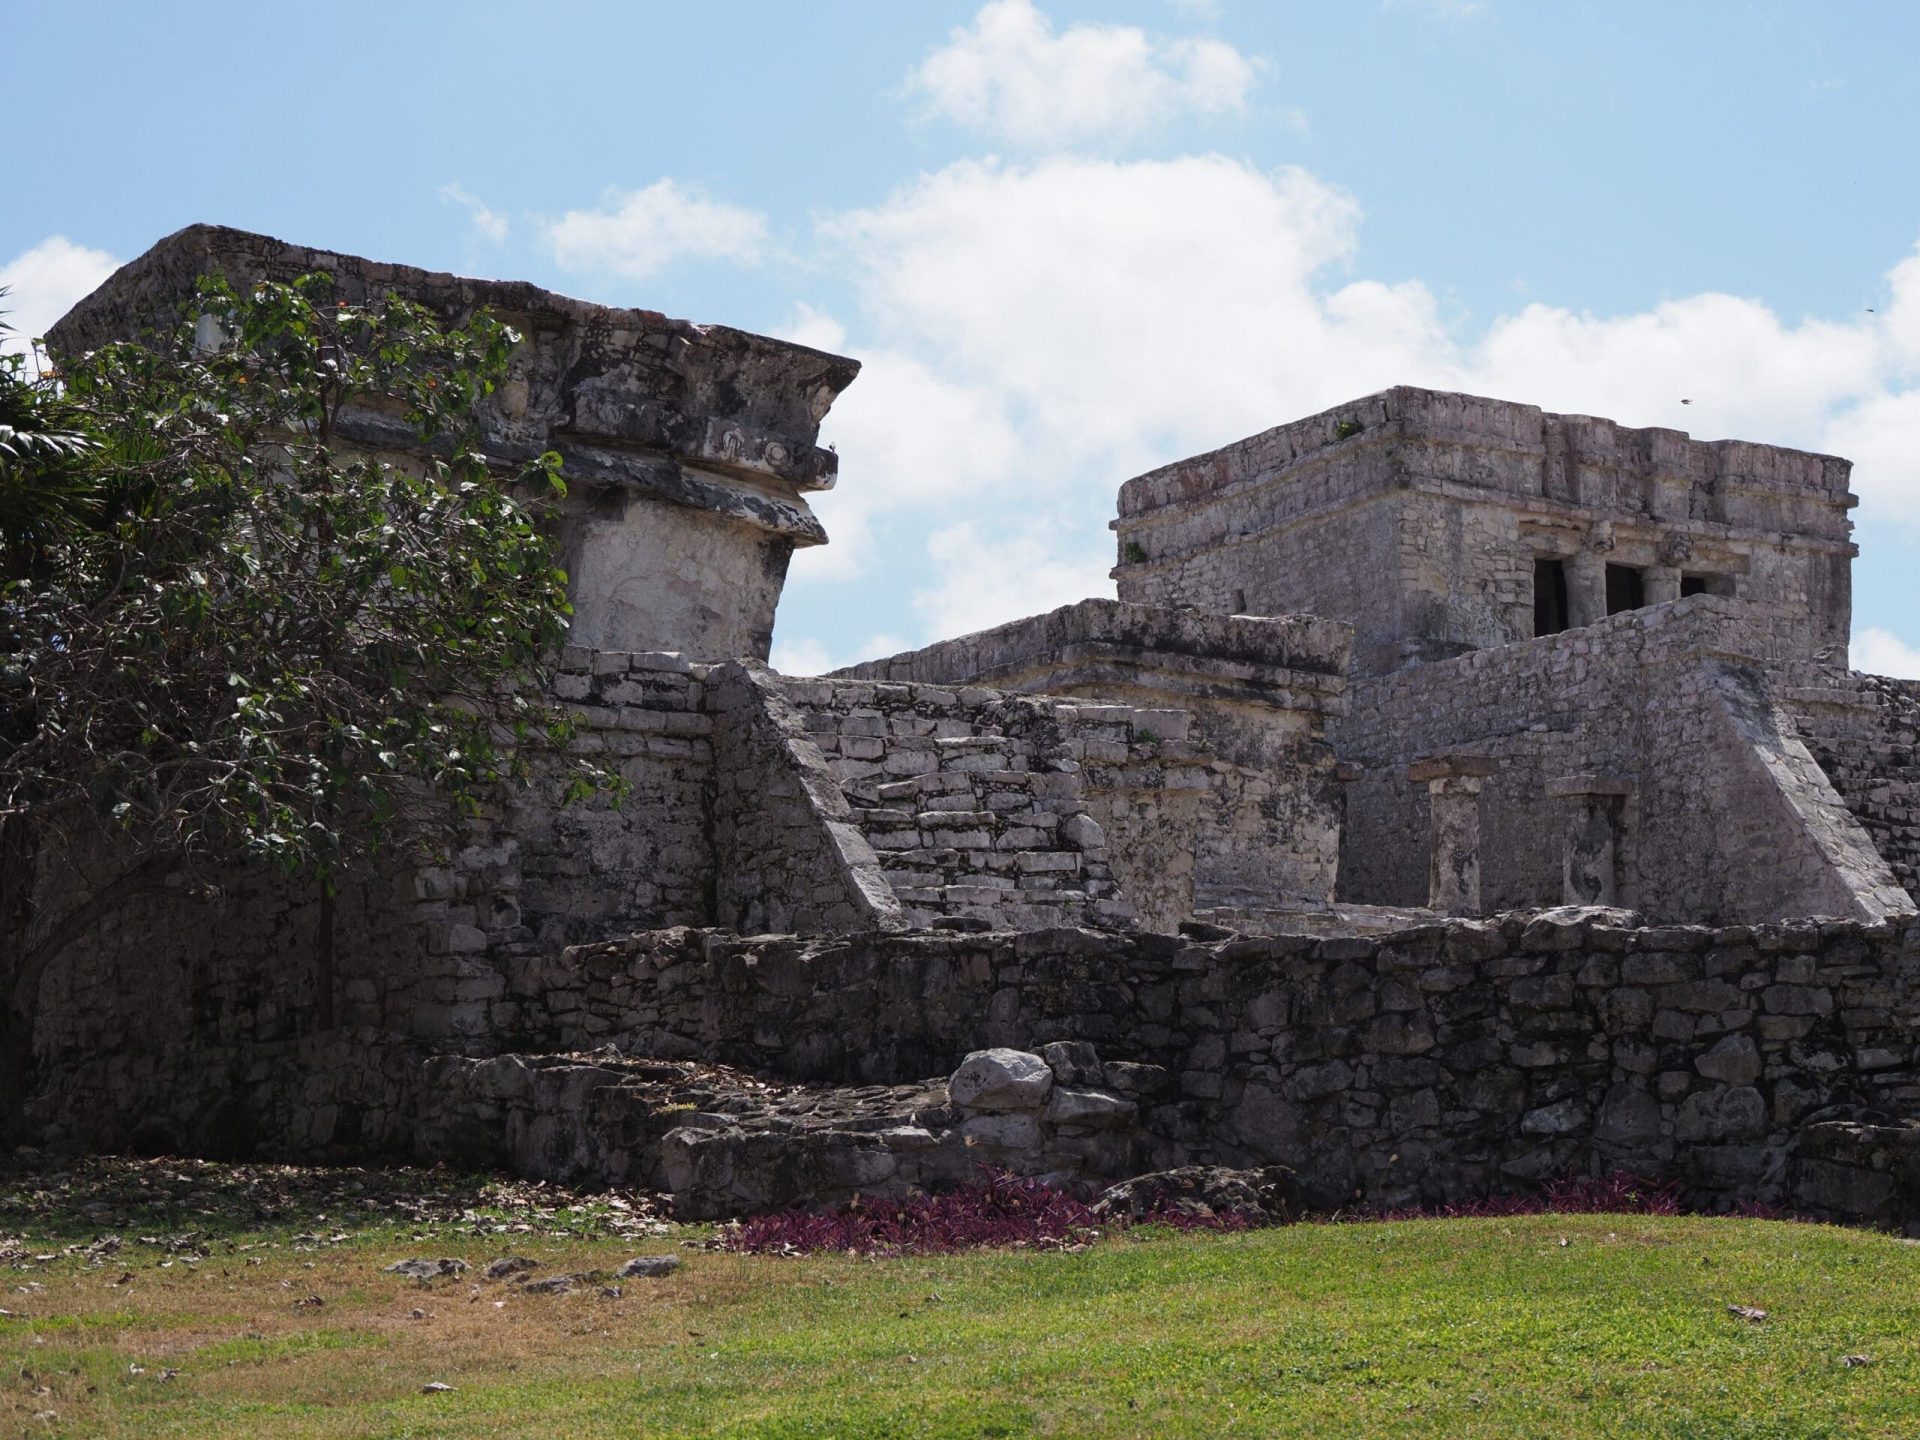 How long is the Tulum tour?